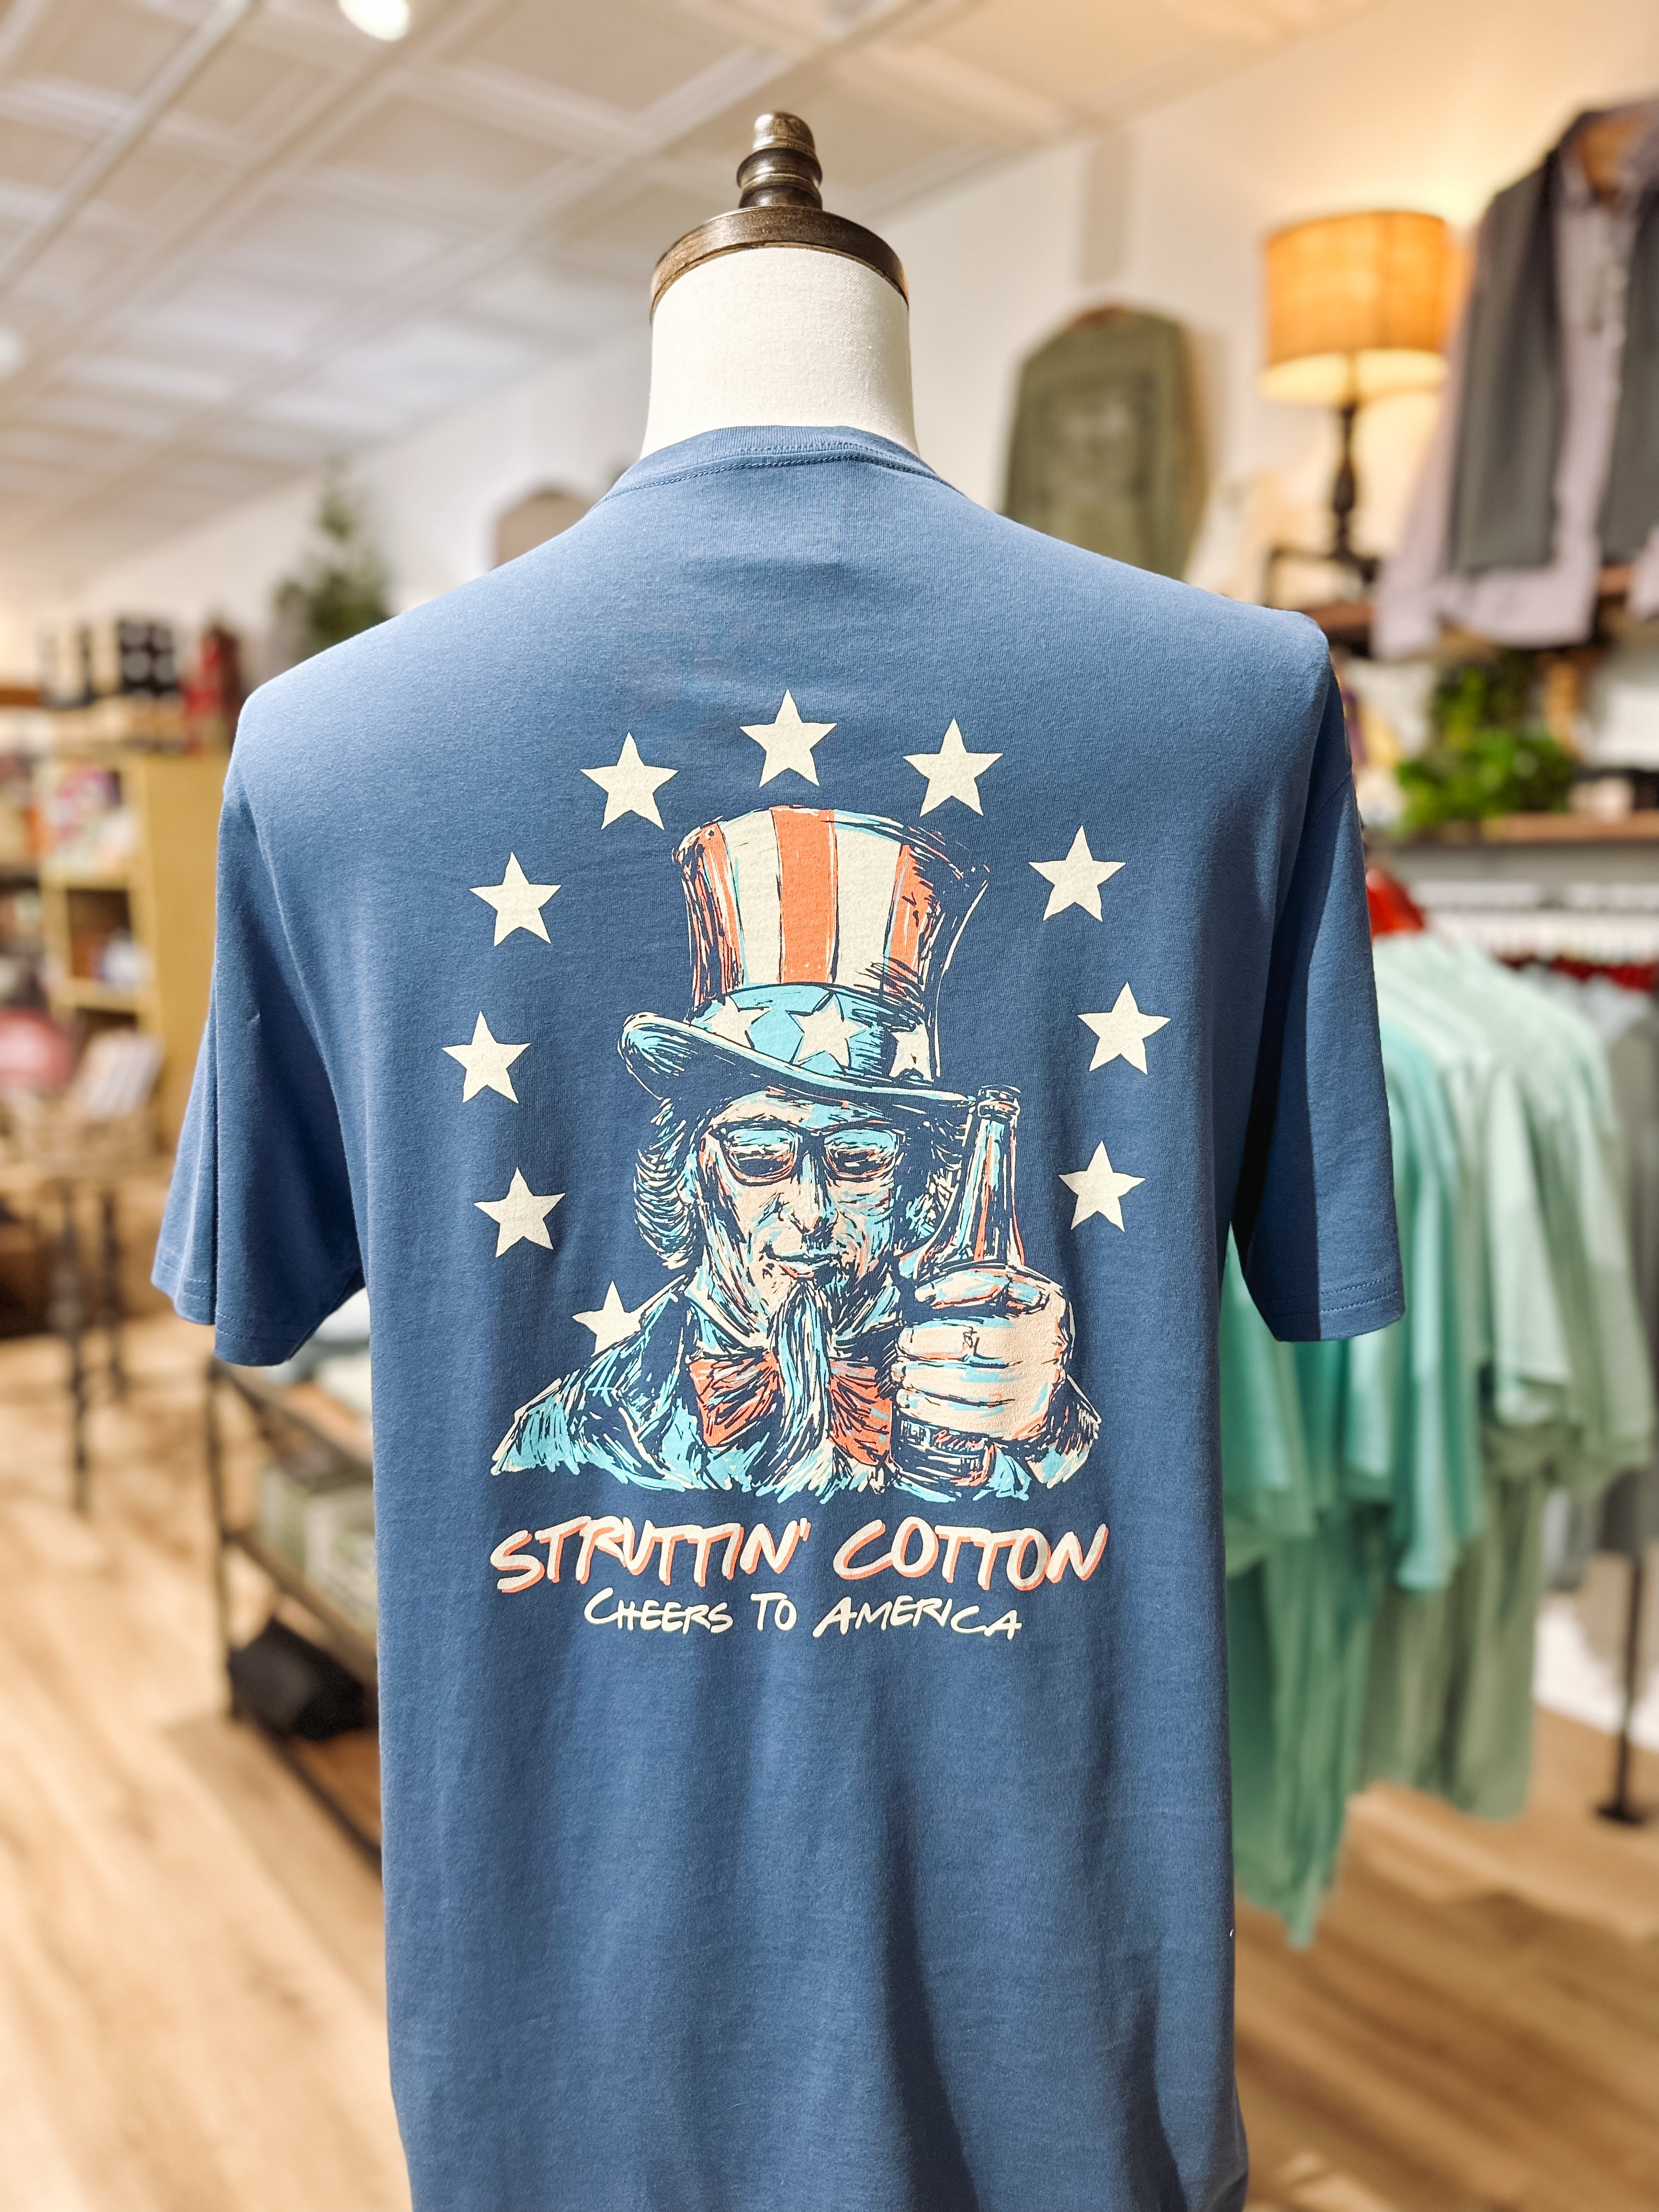 Cheers to America Tee by Struttin’ Cotton